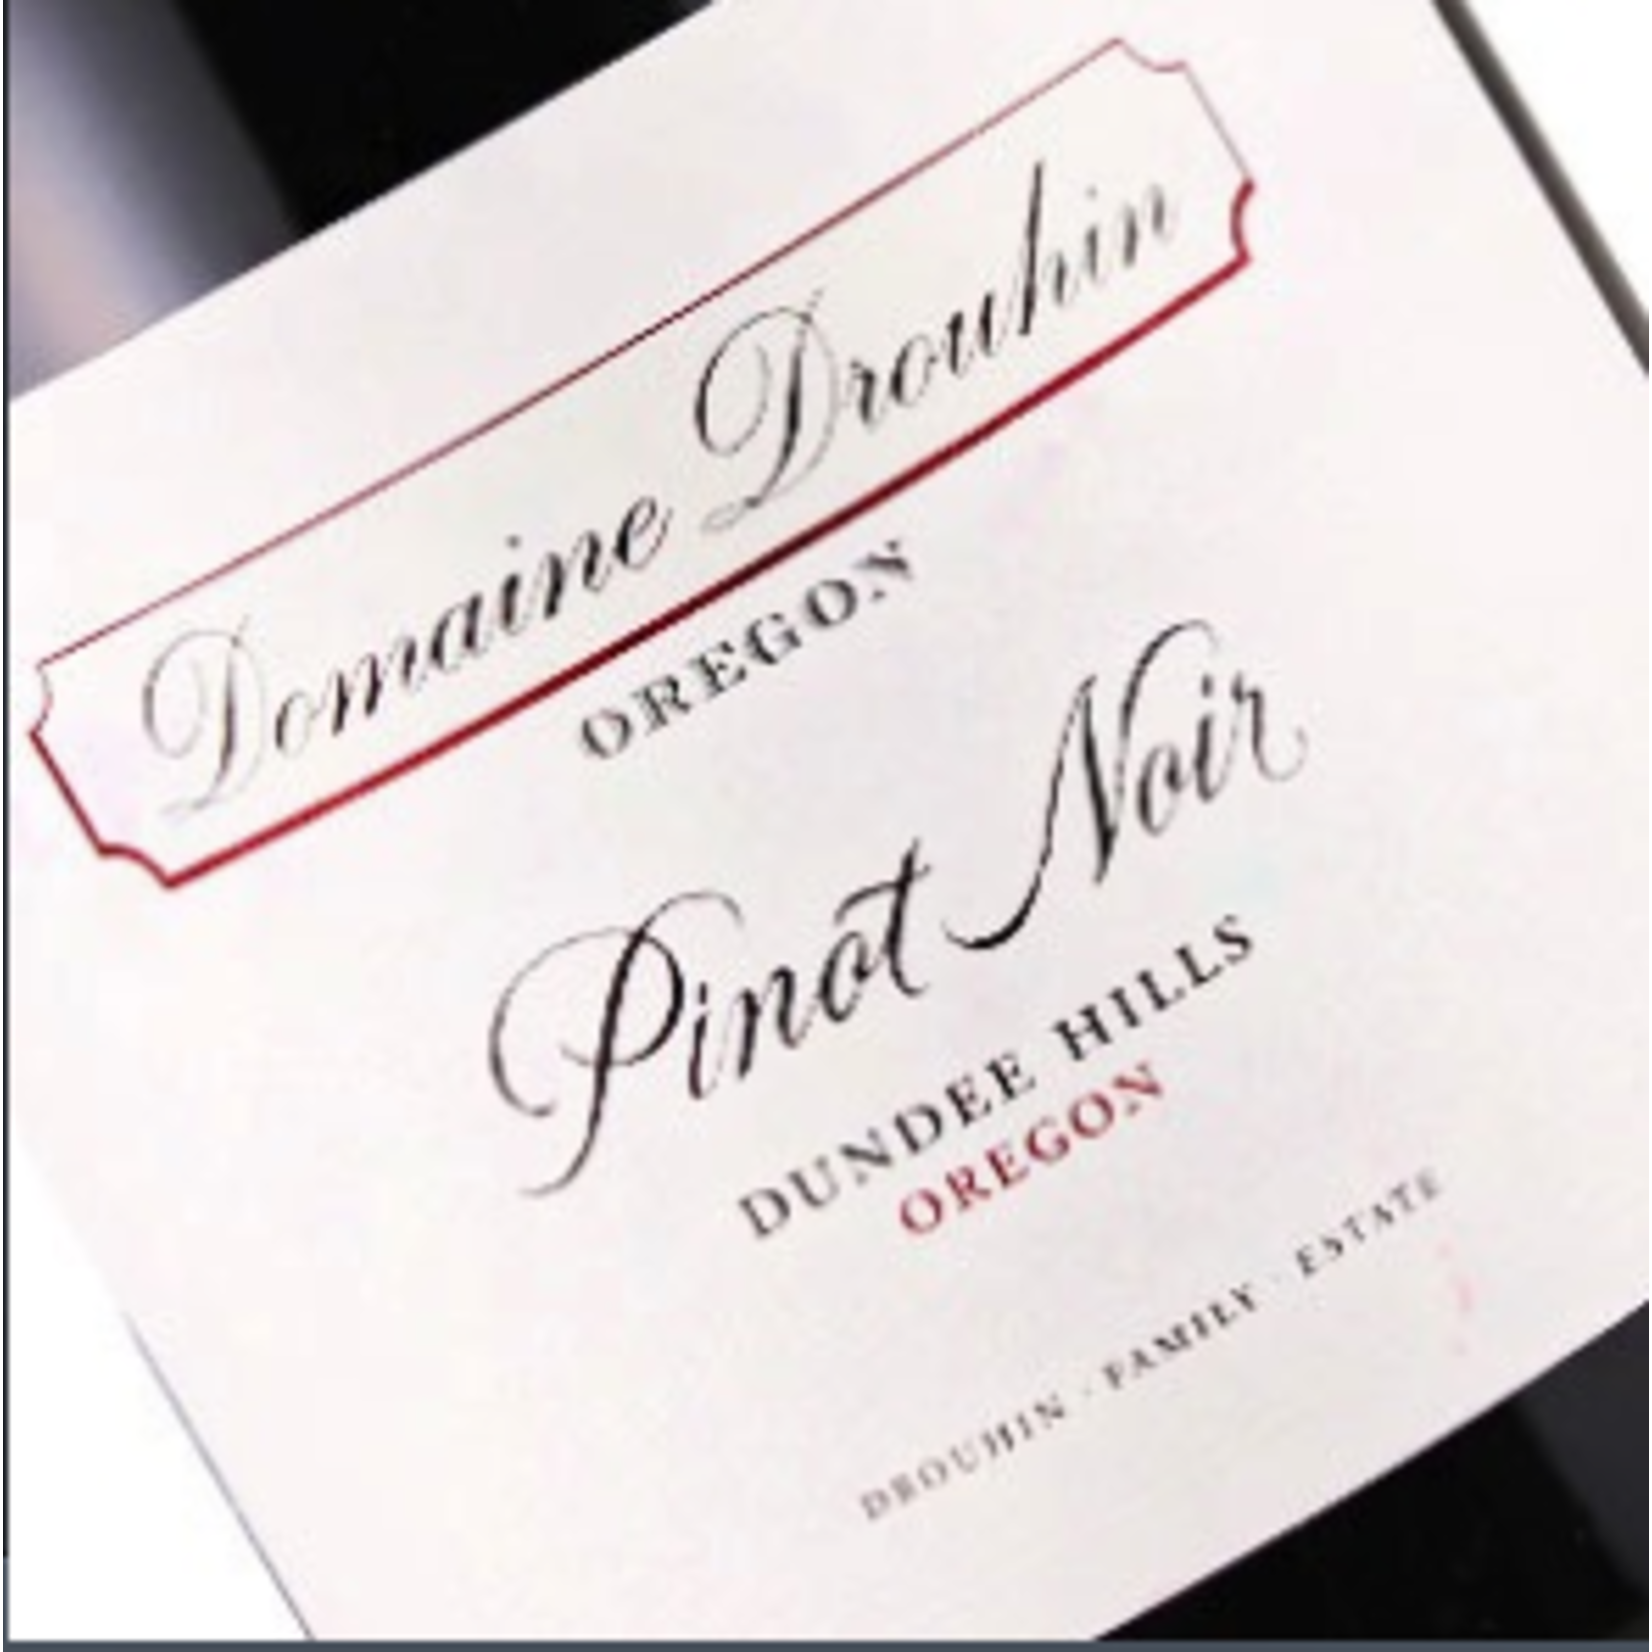 Drouhin Family Estate Domaine Drouhin Dundee Hills Pinot Noir 2018 Dundee Hills, Willamette Valley, Oregon  96pts-JS, 91pts-WE